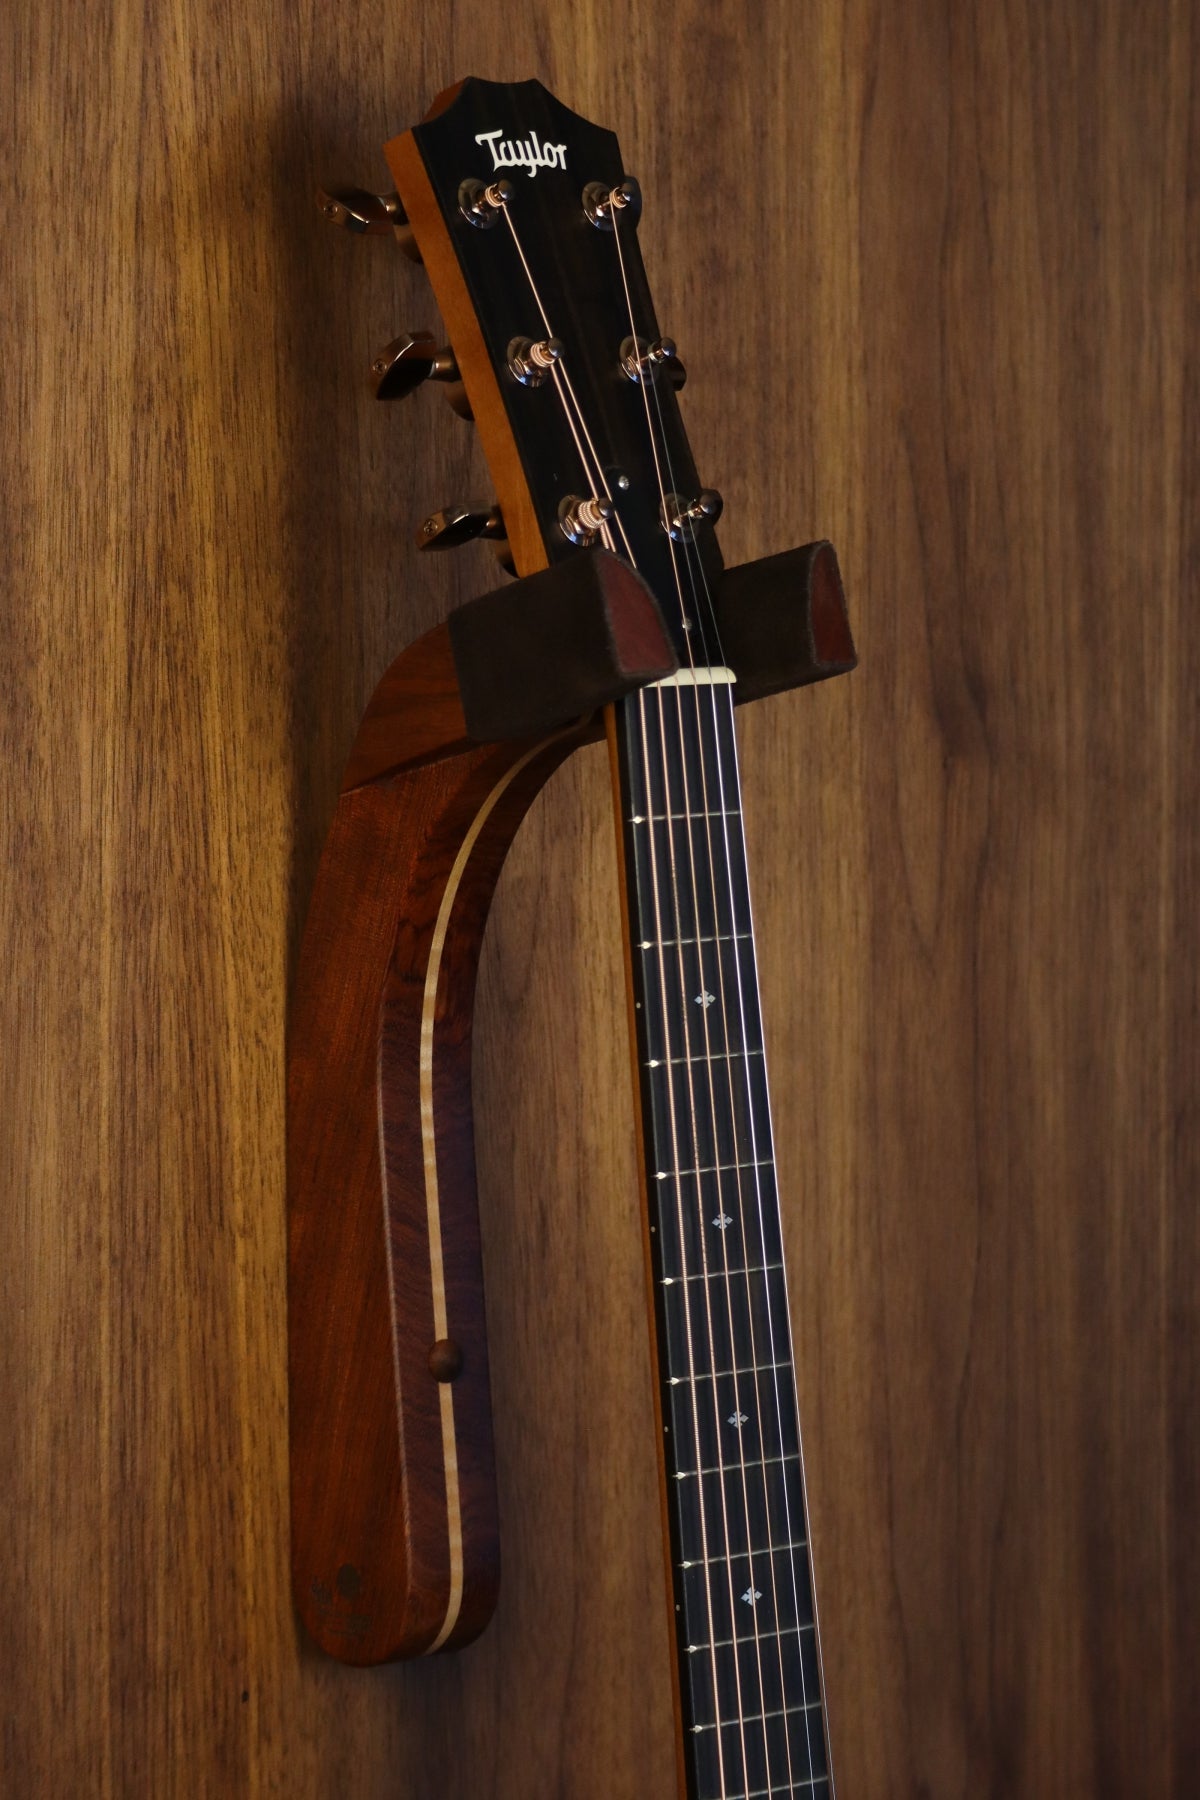 Bubinga rosewood and curly maple wood guitar wall mount hanger installed on paneled wall with Taylor guitar